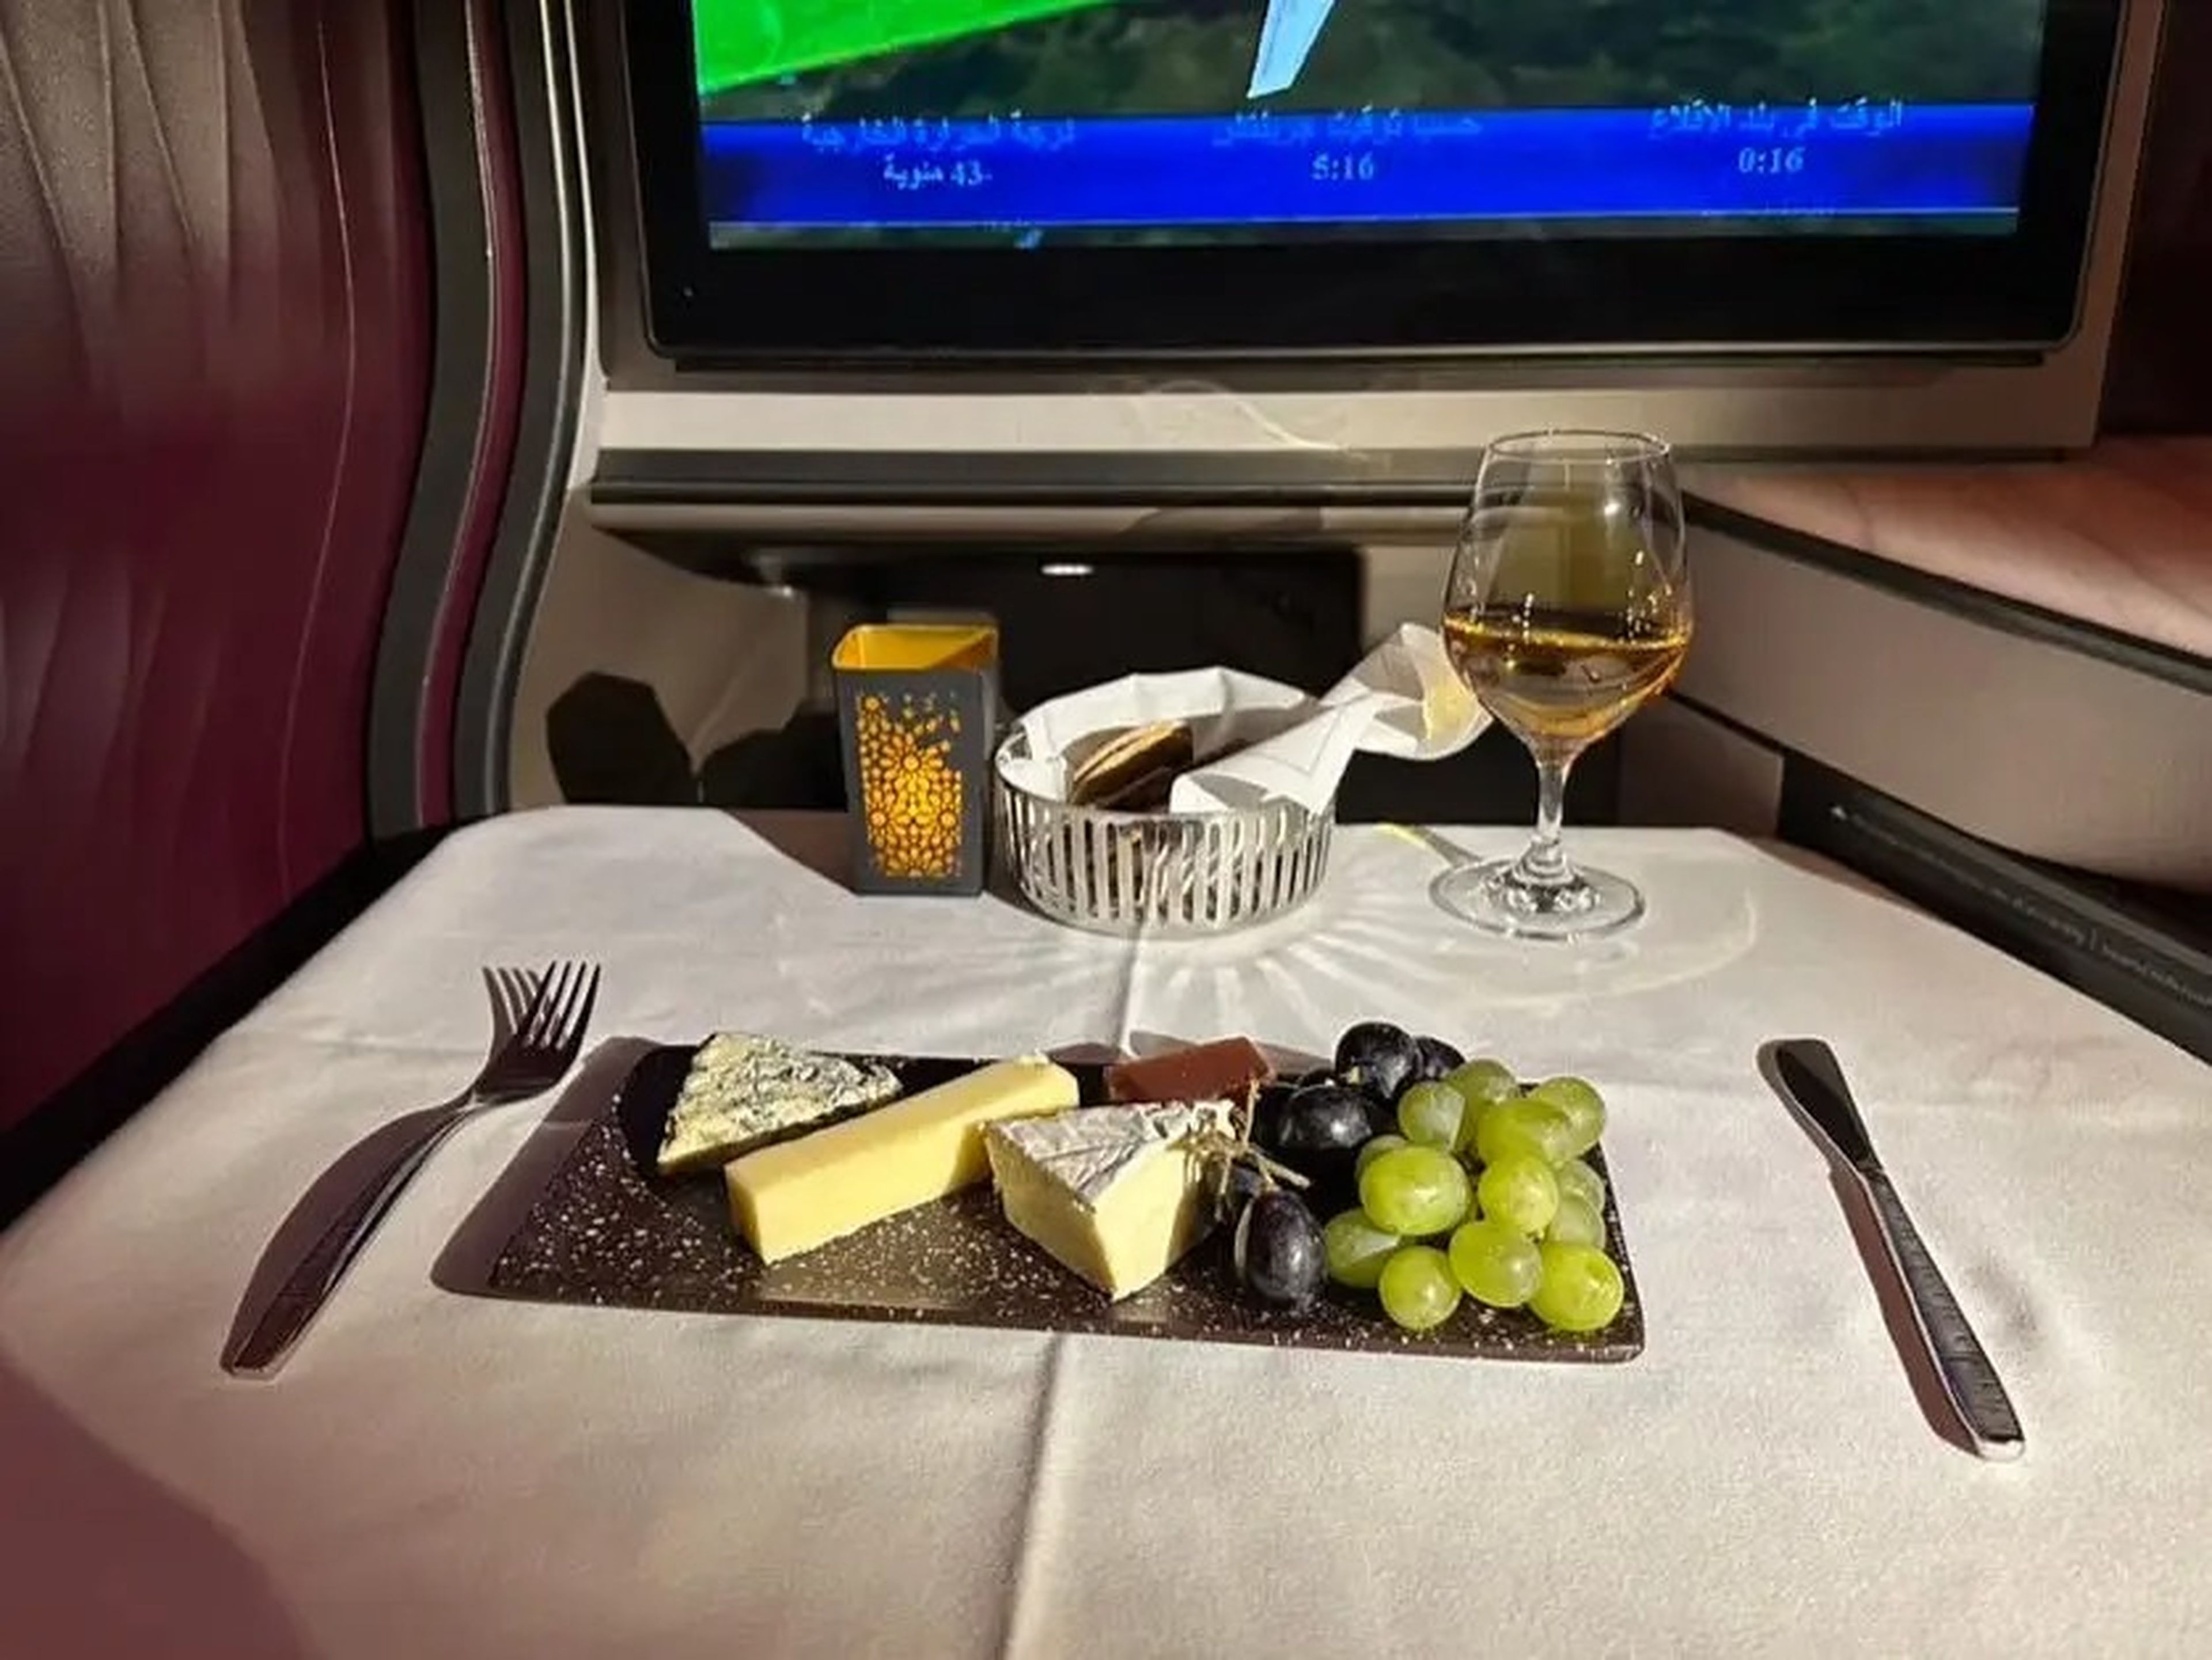 Wine and a cheese plate on an airplane table.